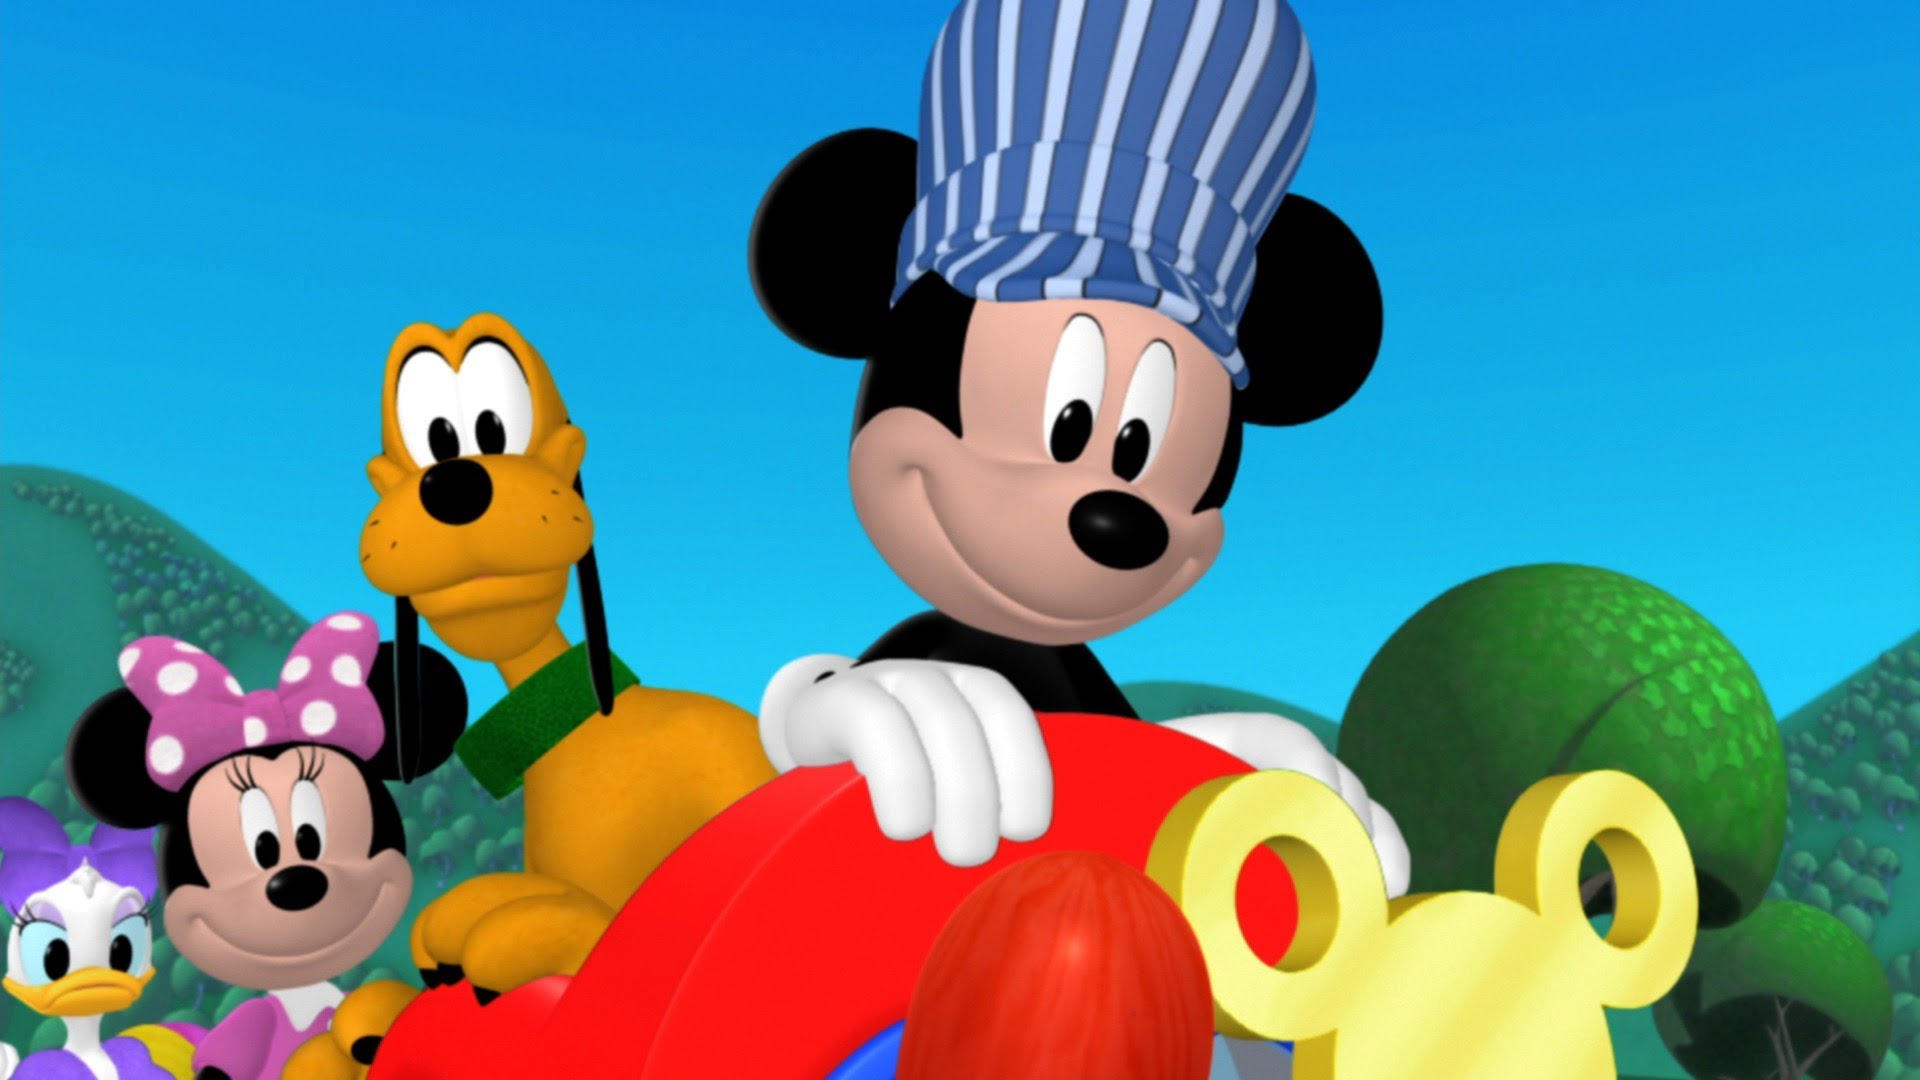 mickey mouse clubhouse full episodes